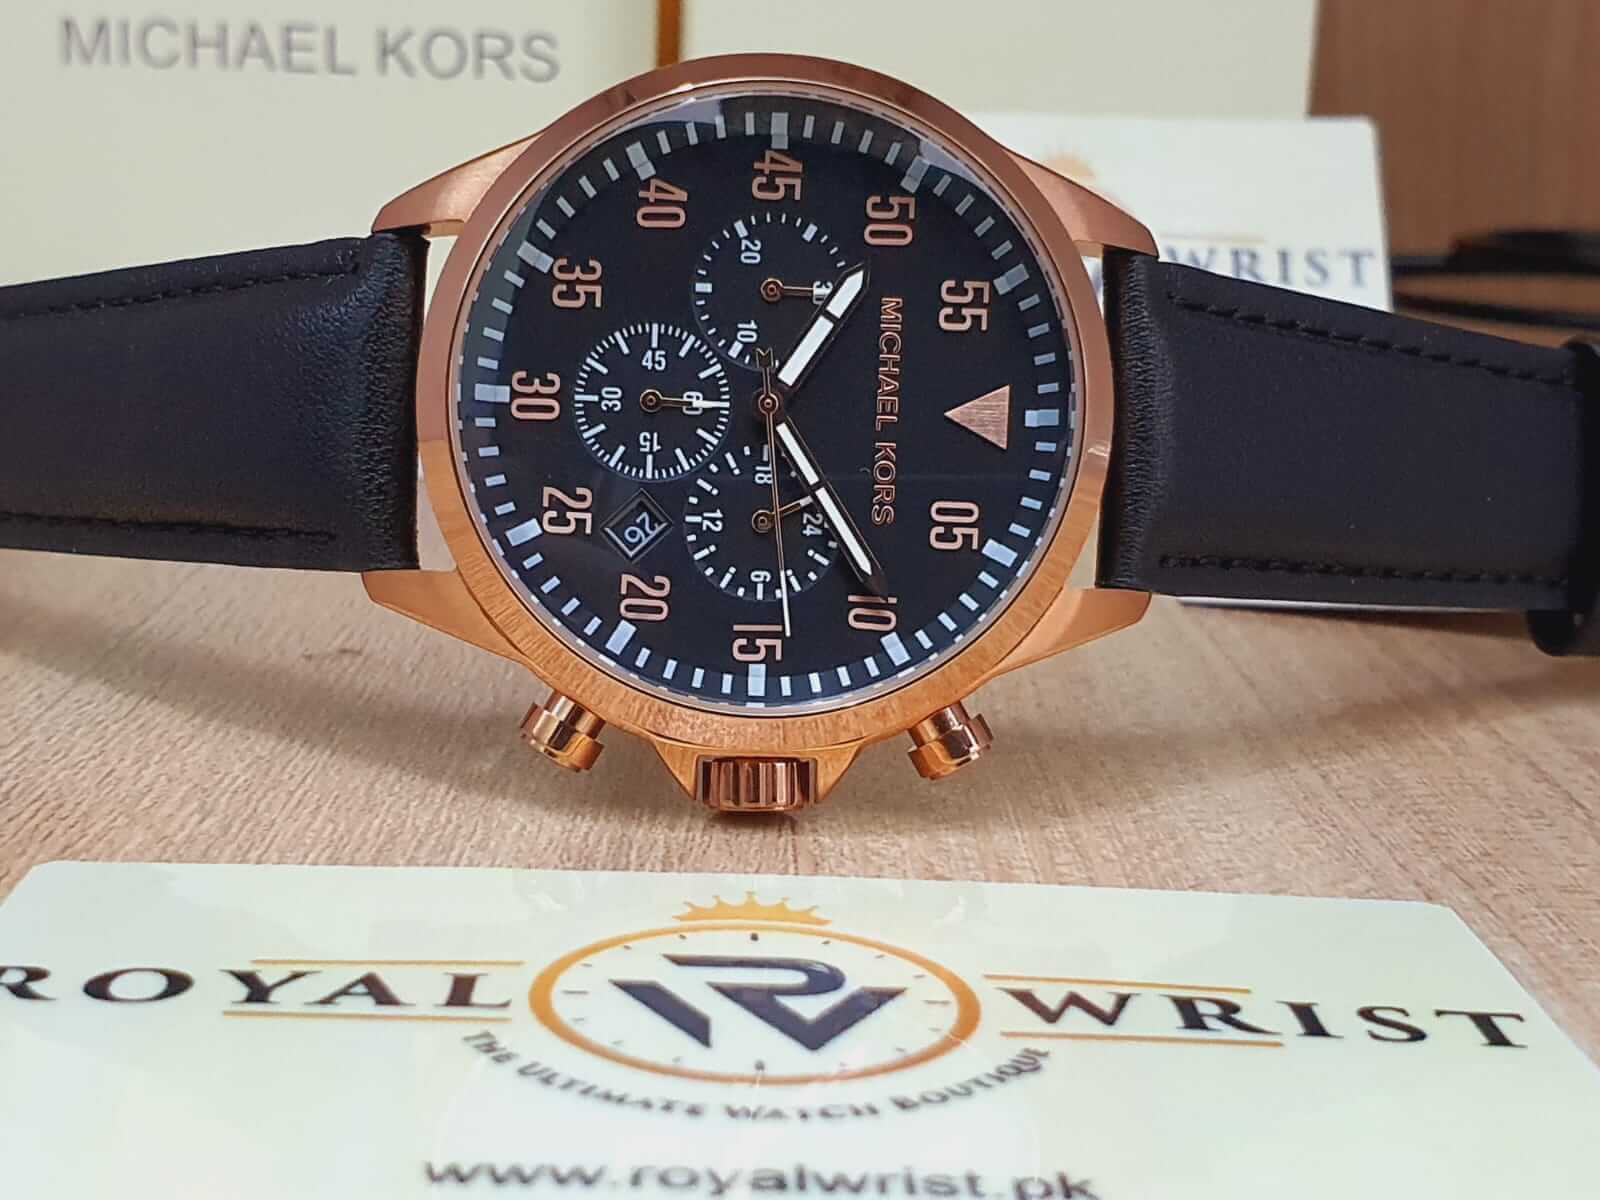 Michael Kors Gage Chronograph Black Dial Mens Watch MK8535  The Watches  Men  CO